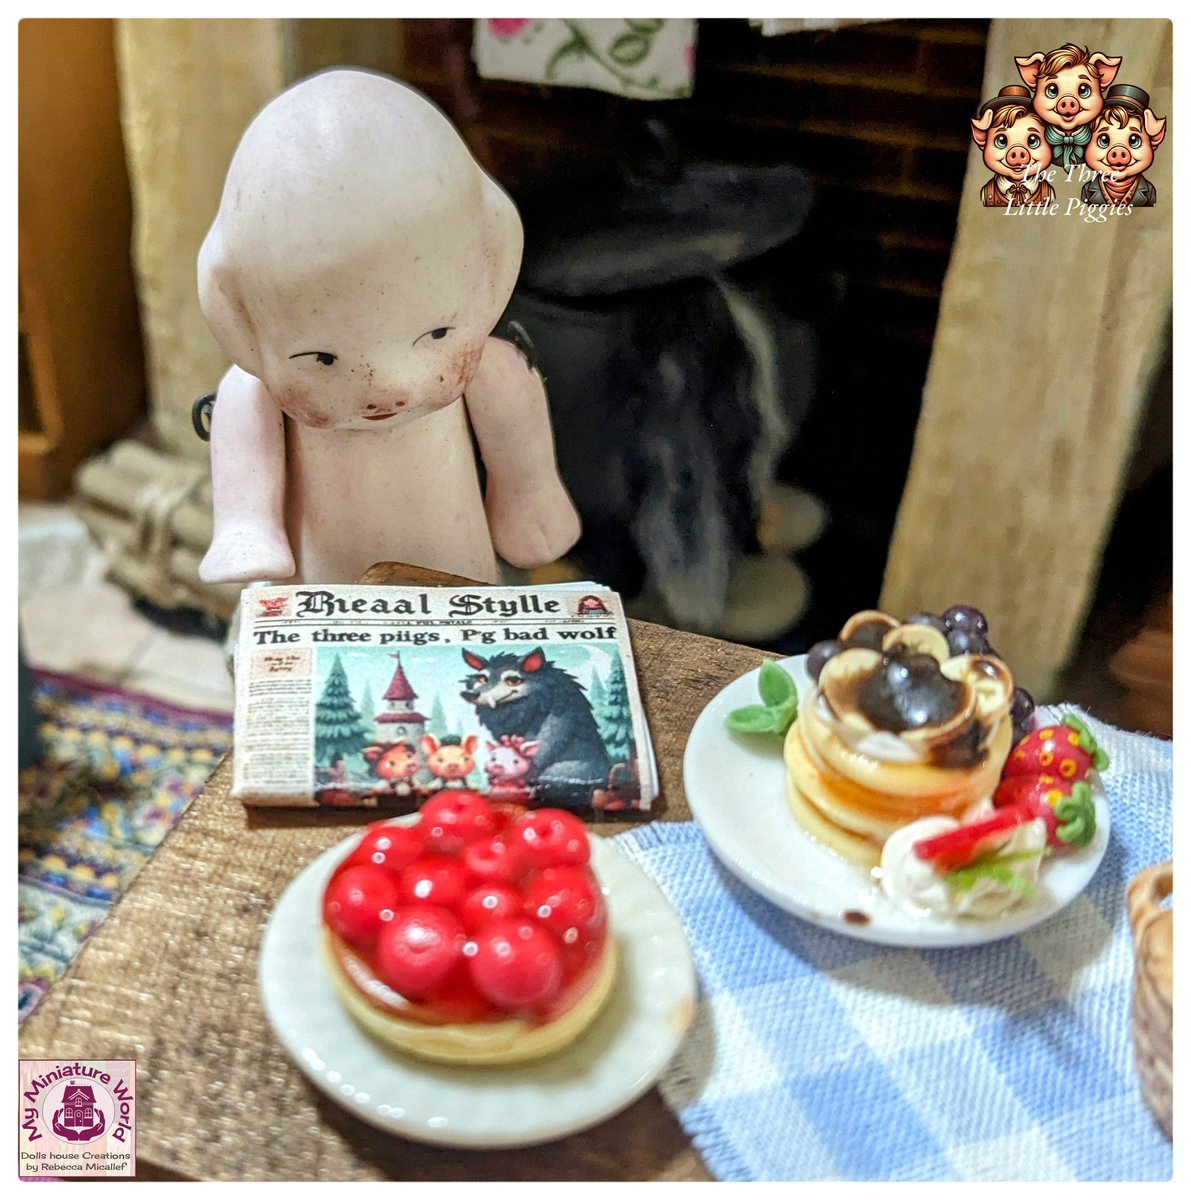 As the Three Little Piggies Project comes to an end, they make headlines in their own fable world. Keep tuned to see the complete finished project. 

#dollshouse #miniatures #miniaturist #pigs #threelittlepigs #fable #headlines #goodmorning #picoftheday #photooftheday